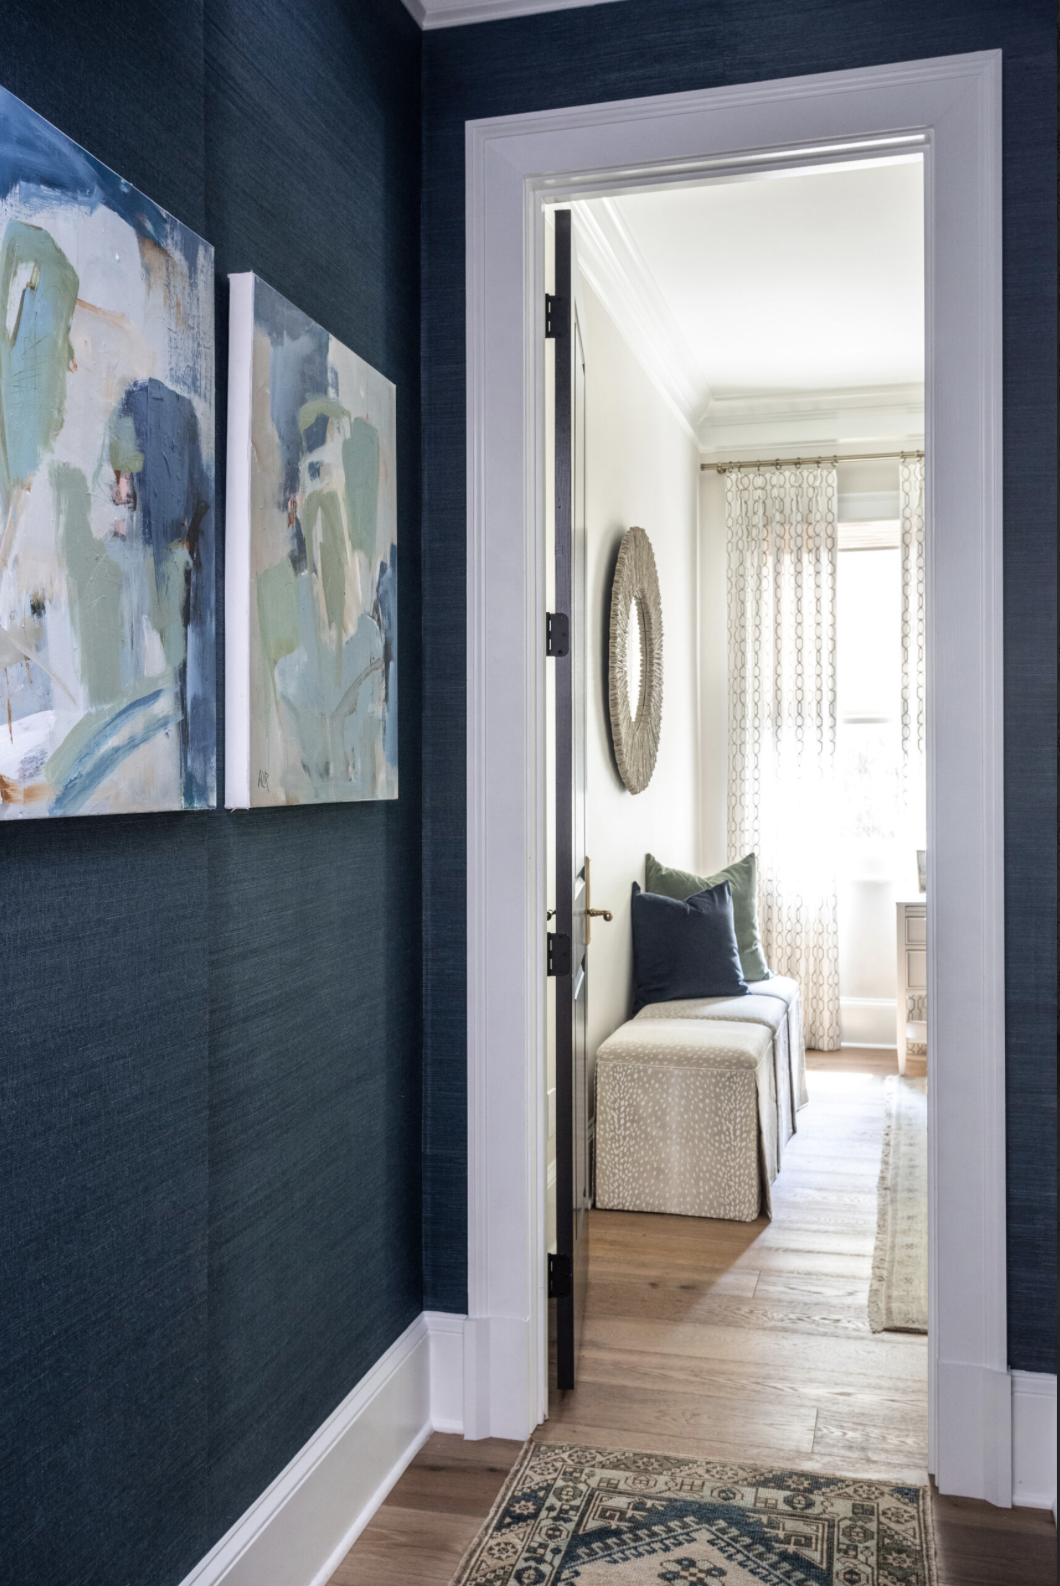 Dark blue grasscloth covers wall in hallway with white trim and two white, blue, and green abstract canvasses hanging on wall.